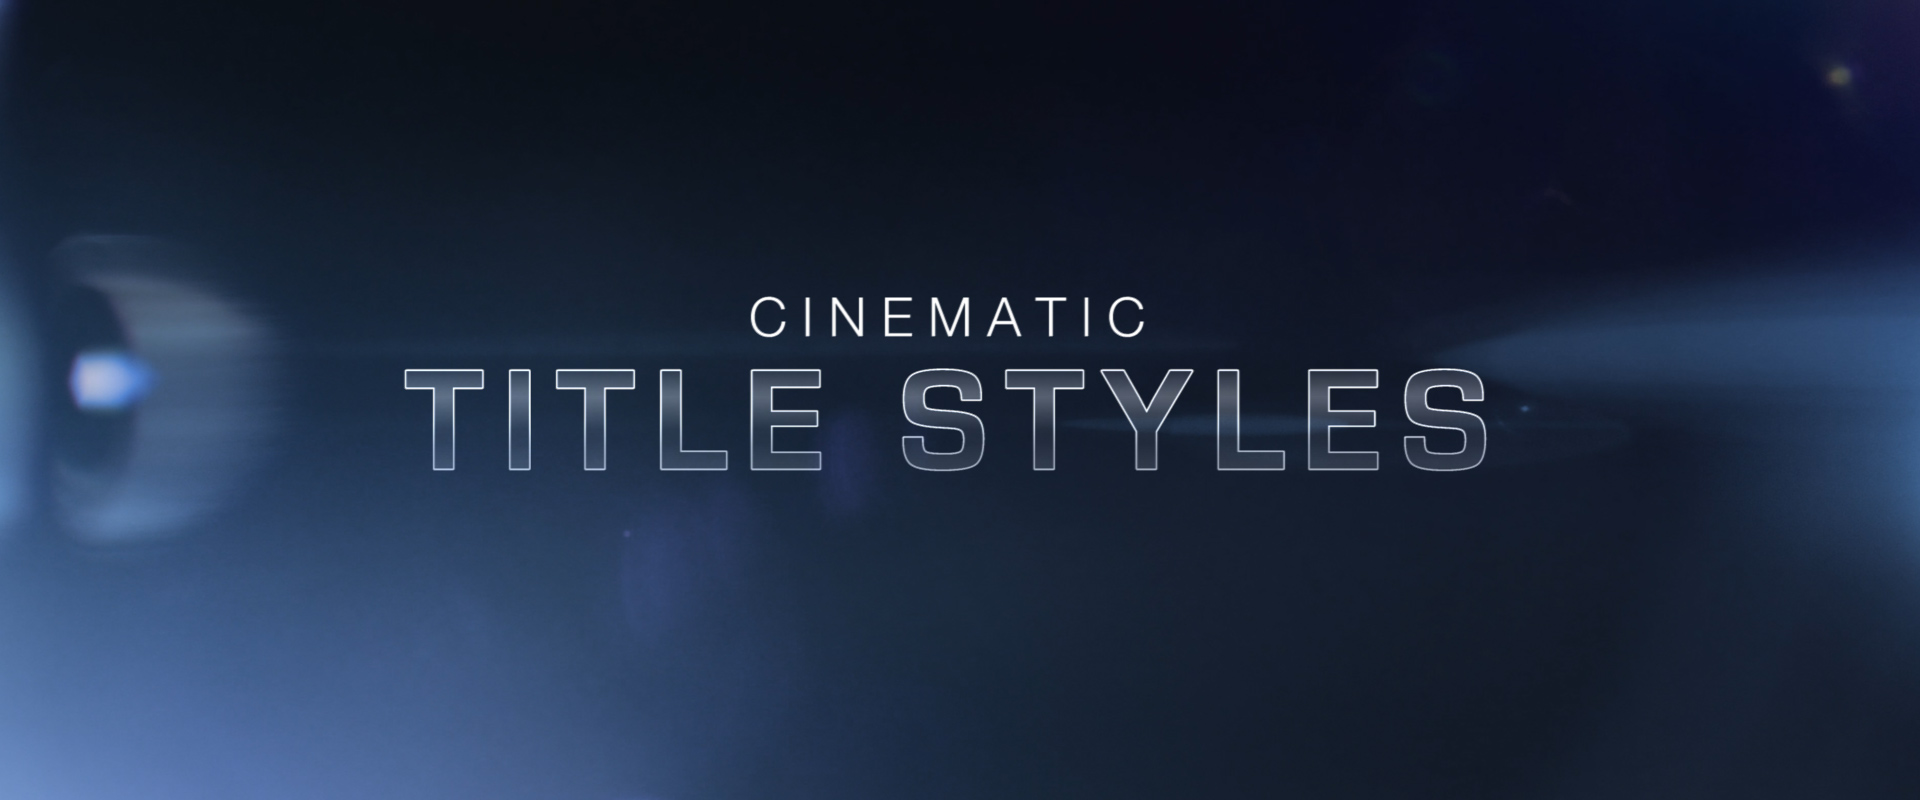 Free Cinematic Title Style Library for Premiere Pro - Cinematic Titles